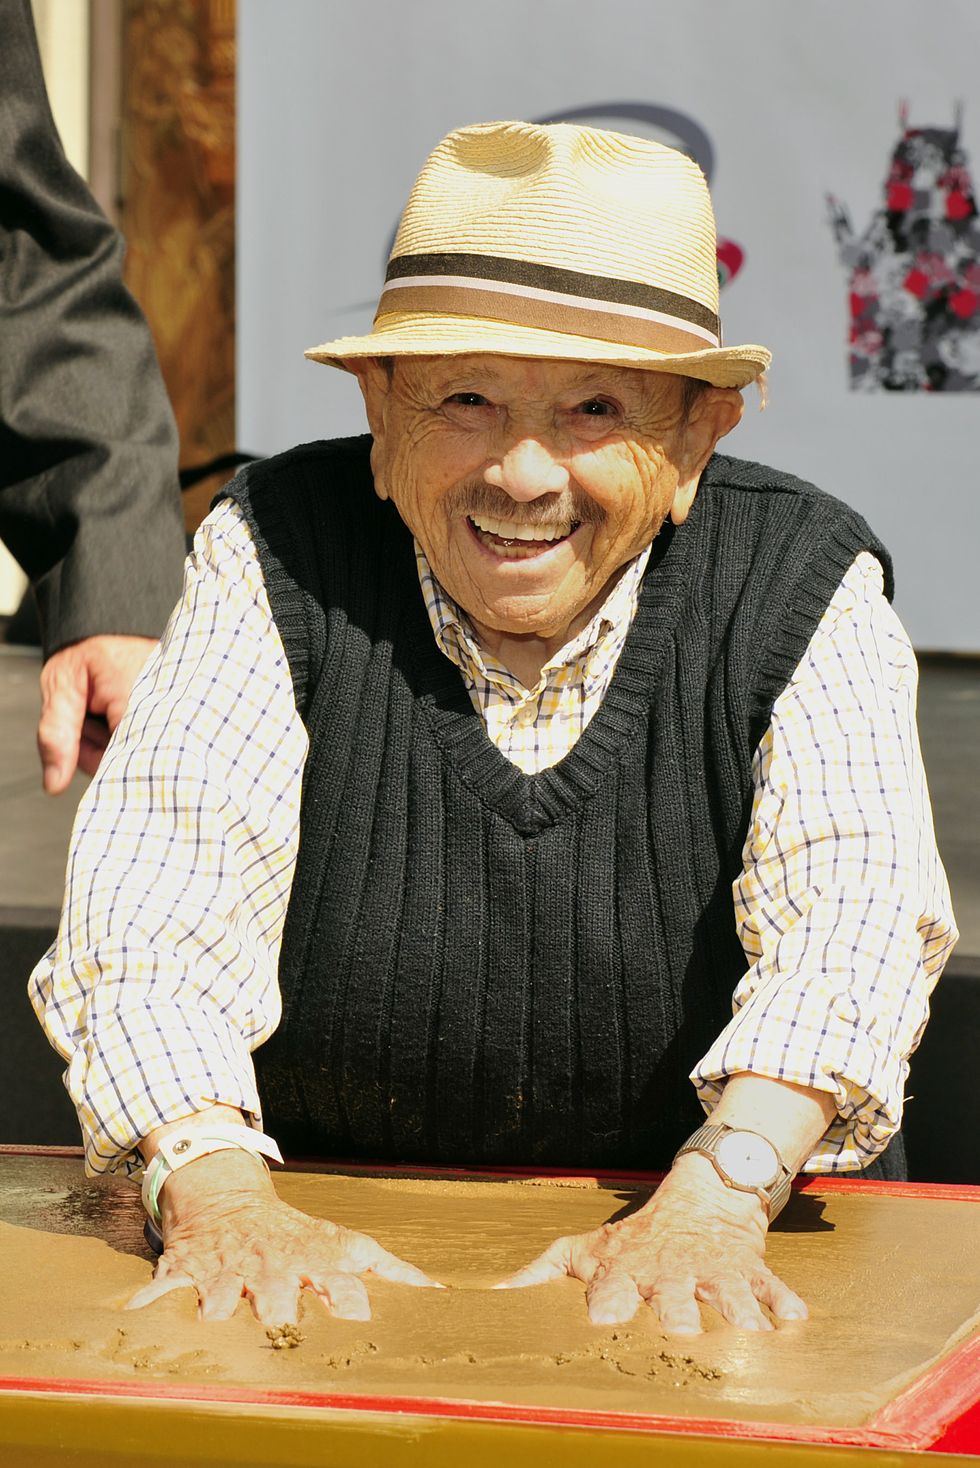 Handprint-Footprint Ceremony For "The Lollipop Kid" Jerry Maren, 93, Last Of The Munchkins From "The Wizard Of Oz"